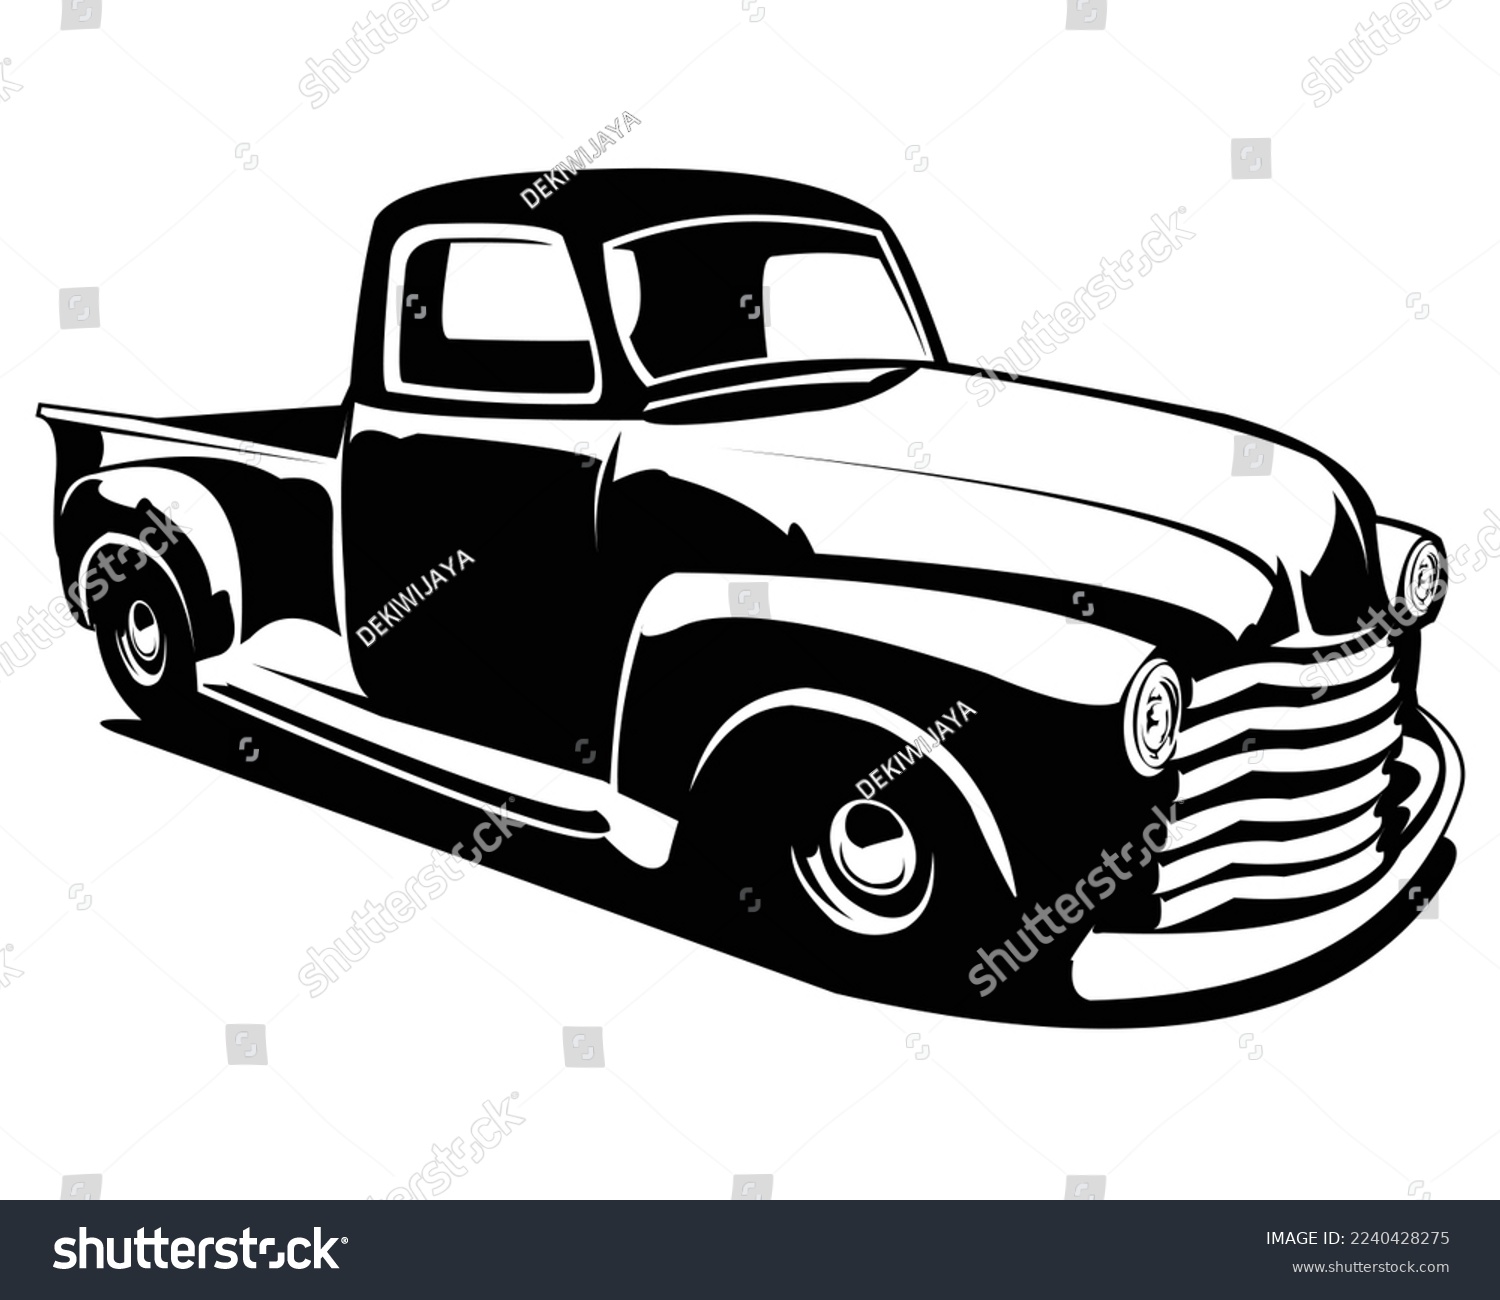 SVG of classic chevy truck vector silhouette isolated white background view from side. Best for logos, badges, emblems, classic truck industry. vector illustration in eps 10. svg